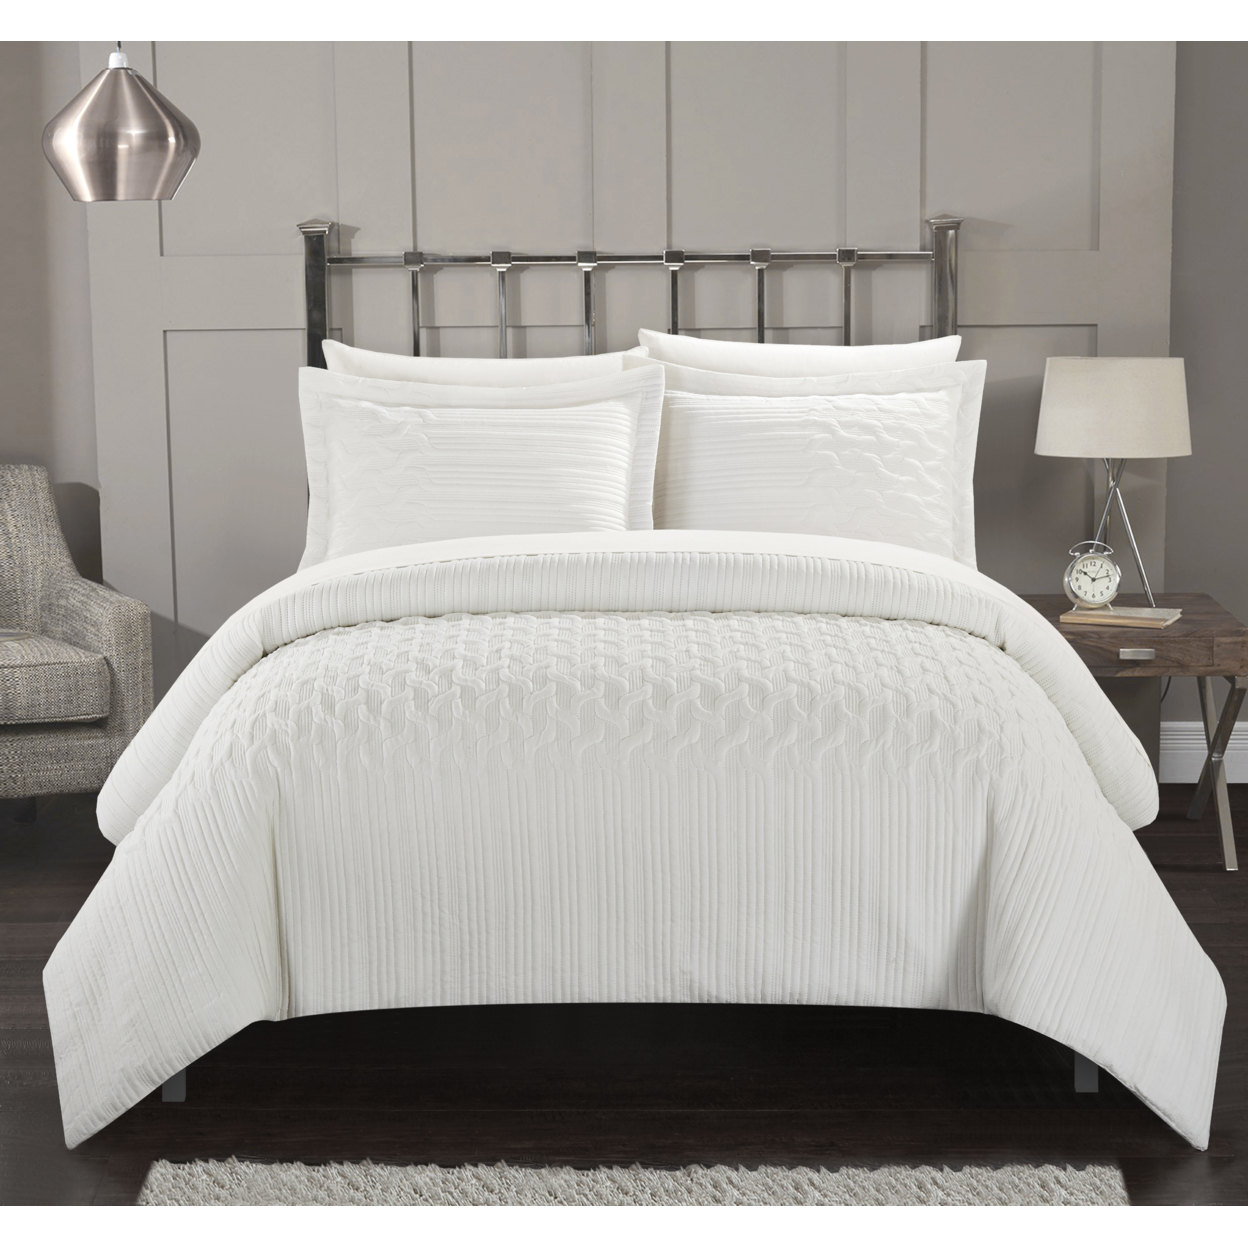 Jazmaine 3 Or 2 Piece Comforter Set Embossed Embroidered Quilted Geometric Vine Pattern Bedding - White, King